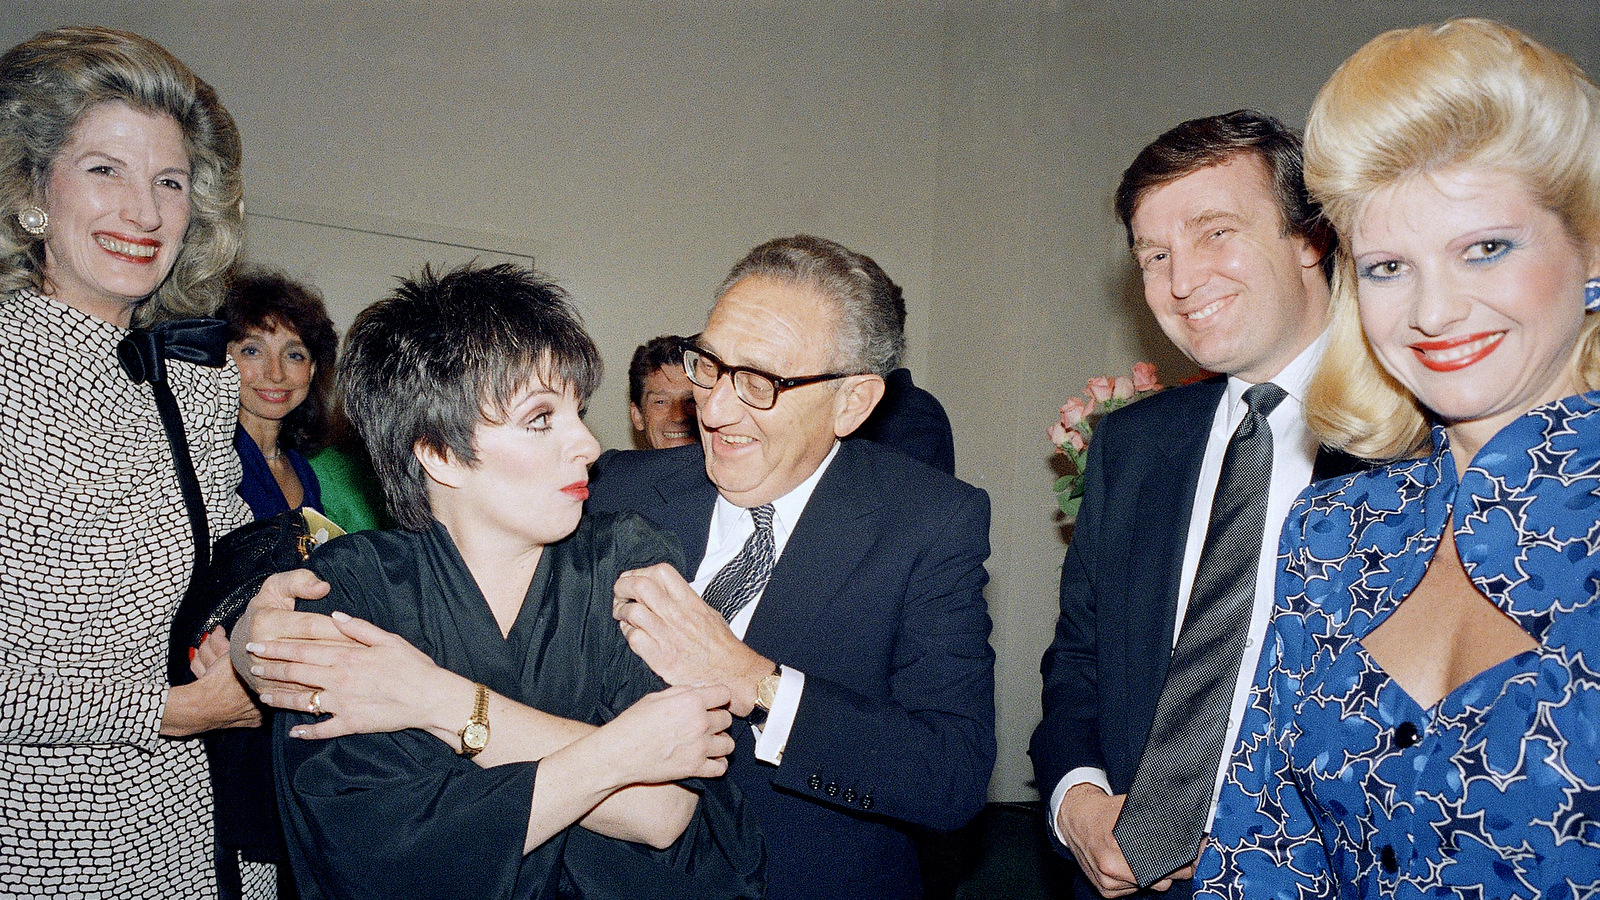 Henry Kissinger and Nancy Kissinger, Donald Trump and wife Ivana Trump backstage at a Liza Minelli show in New York, June 11, 1987. (AP/Ron Frehm)